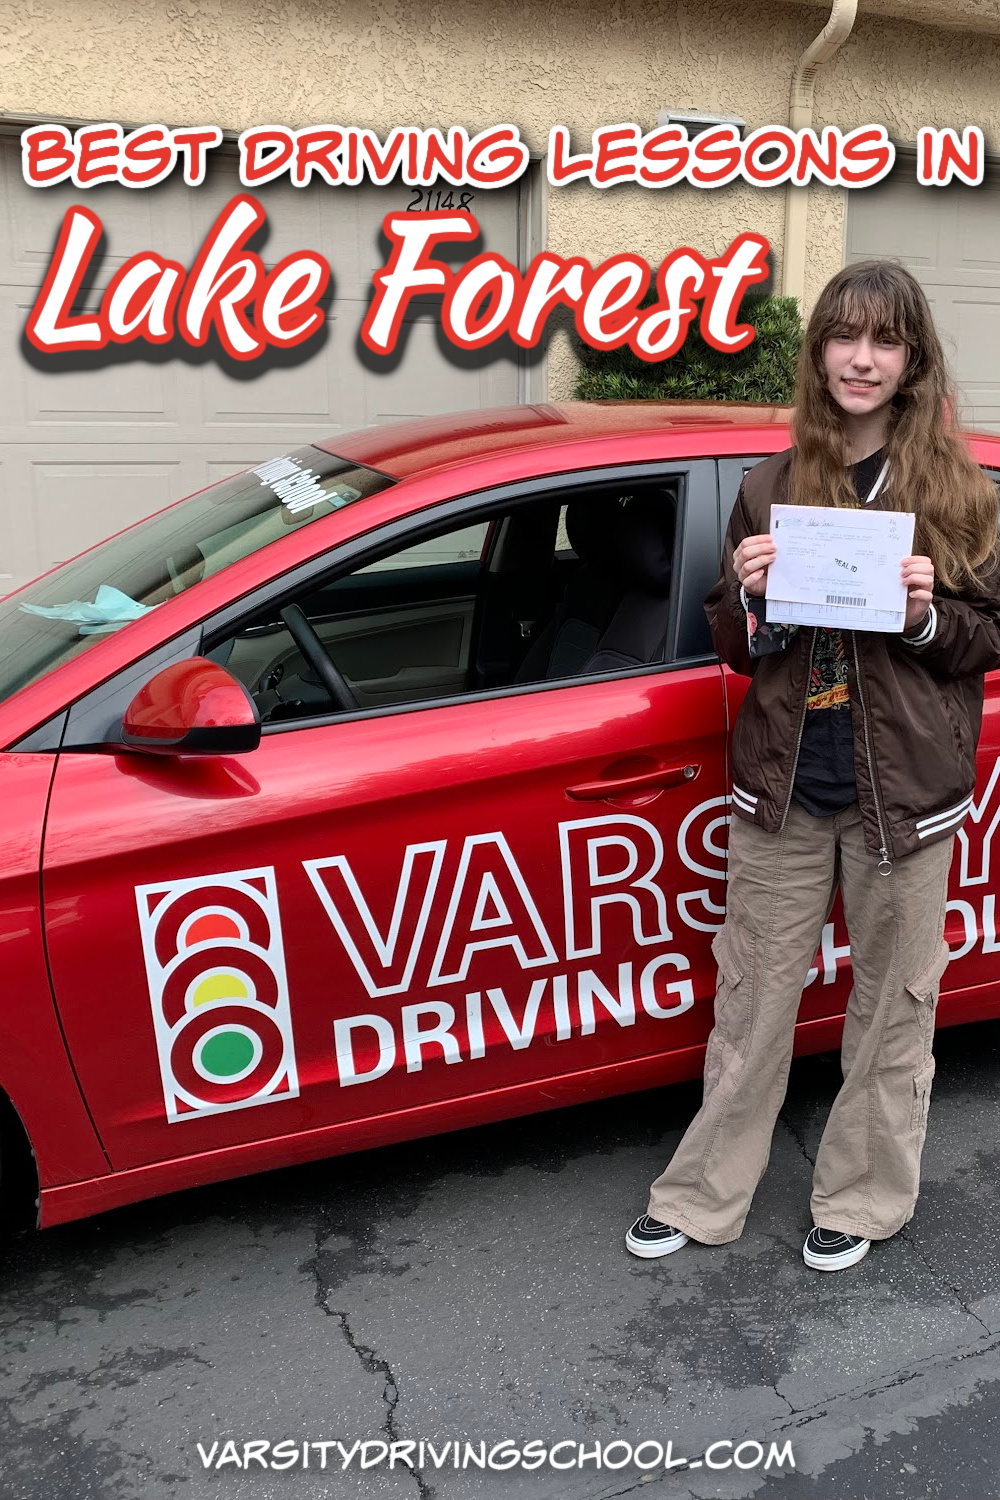 The best driving school in Lake Forest is Varsity Driving Academy where you can learn how to drive and how to get a driver’s license.